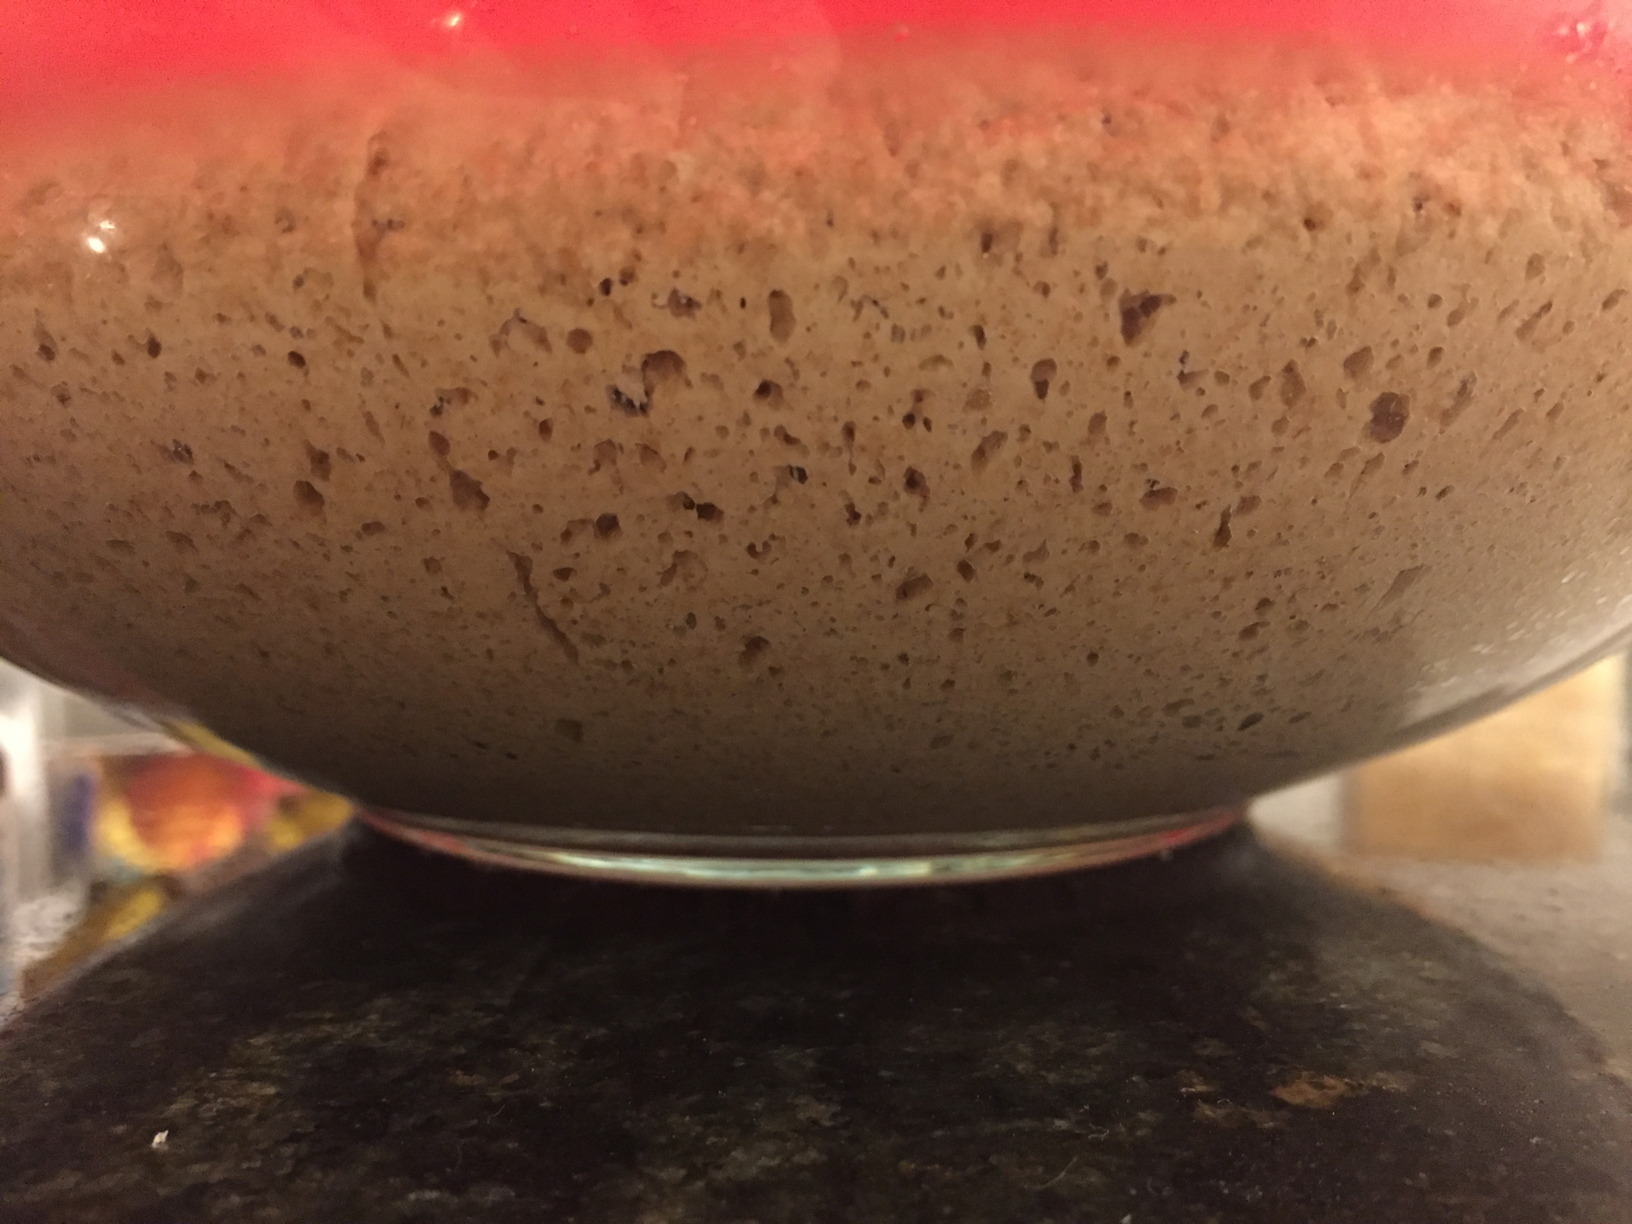 The dough after being left to rise for 4.5 hours